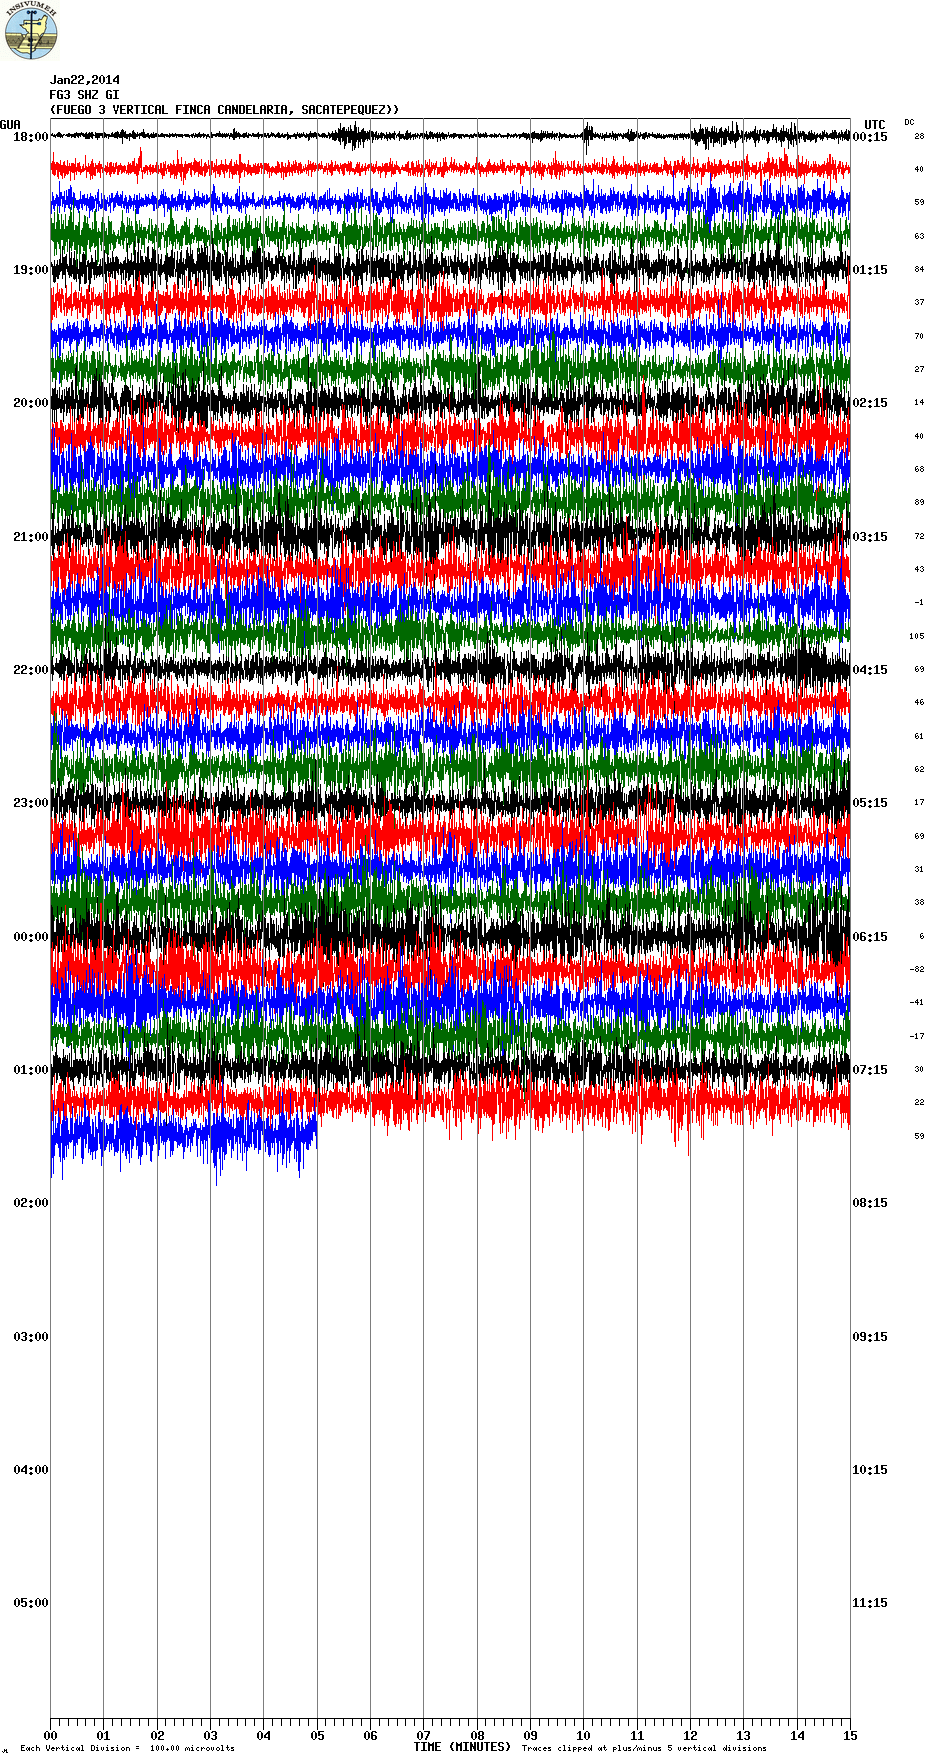 Fuego's seismic signal this morning (FG3 station, INSIVUMEH)